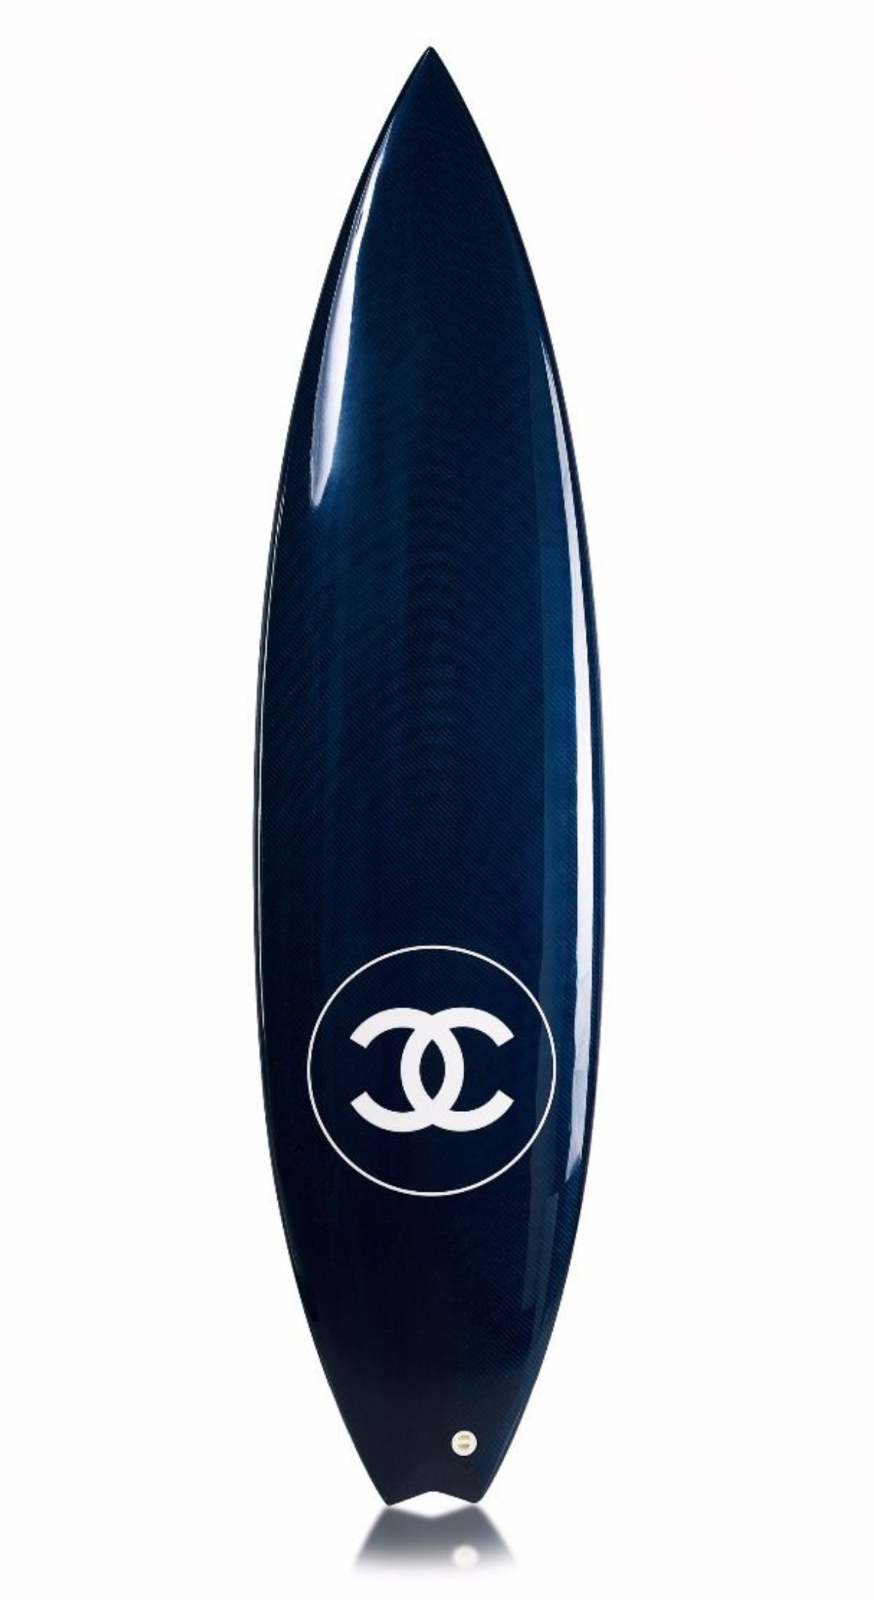 Chanel Black And White Carbon Fiber, Polyuerathane, And Fiberglass, CC  Surfboard Available For Immediate Sale At Sotheby's